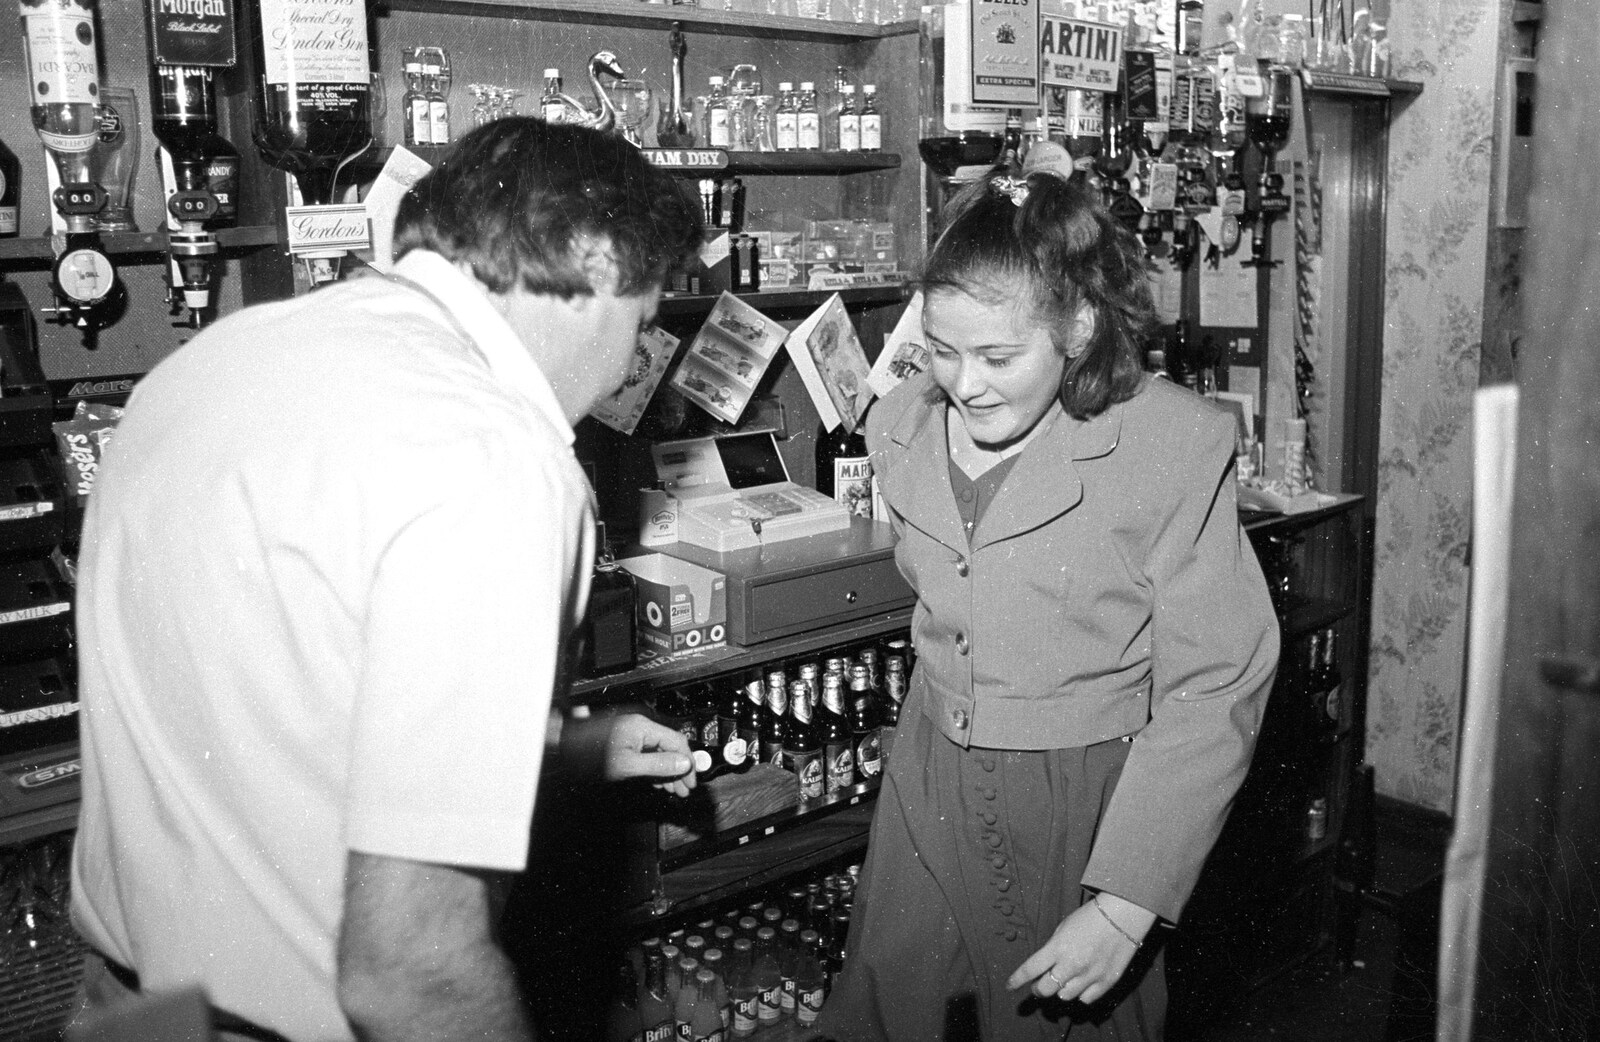 Alan and Claire dance behind the bar from New Year's Eve at the Swan Inn, Brome, Suffolk - 31st December 1992